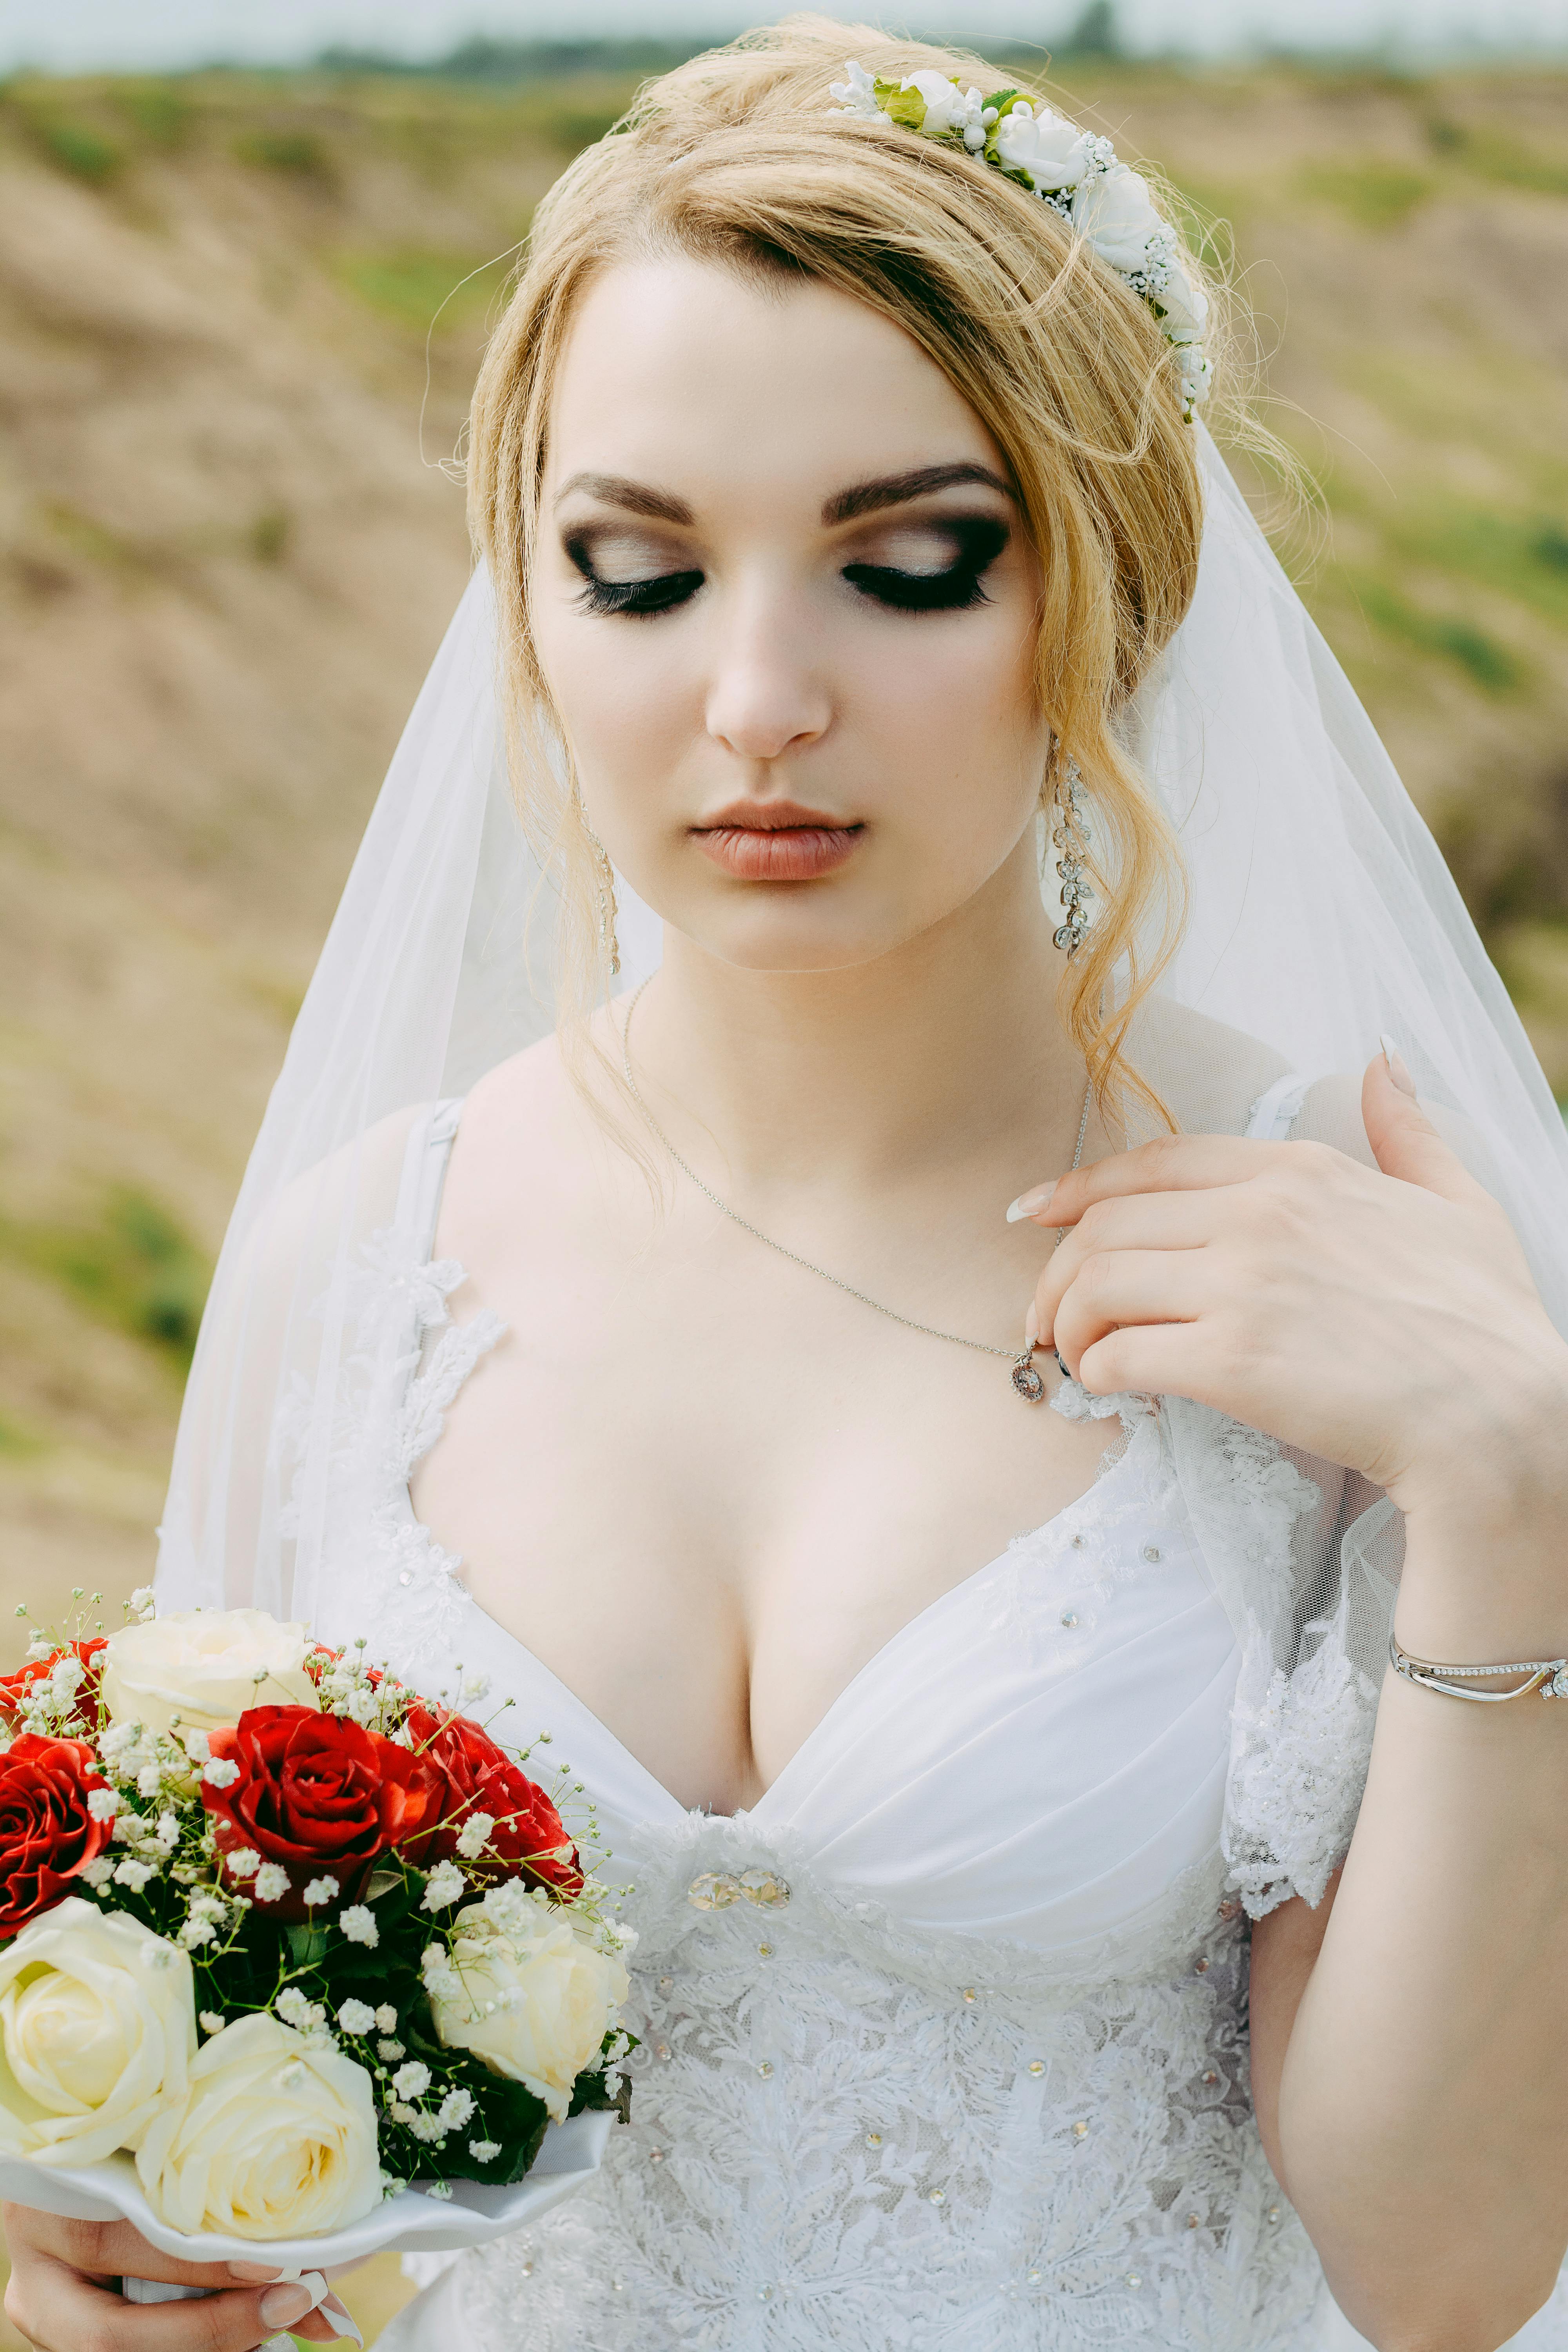 Woman Wearing White Lace Surplice-neck Wedding Gown